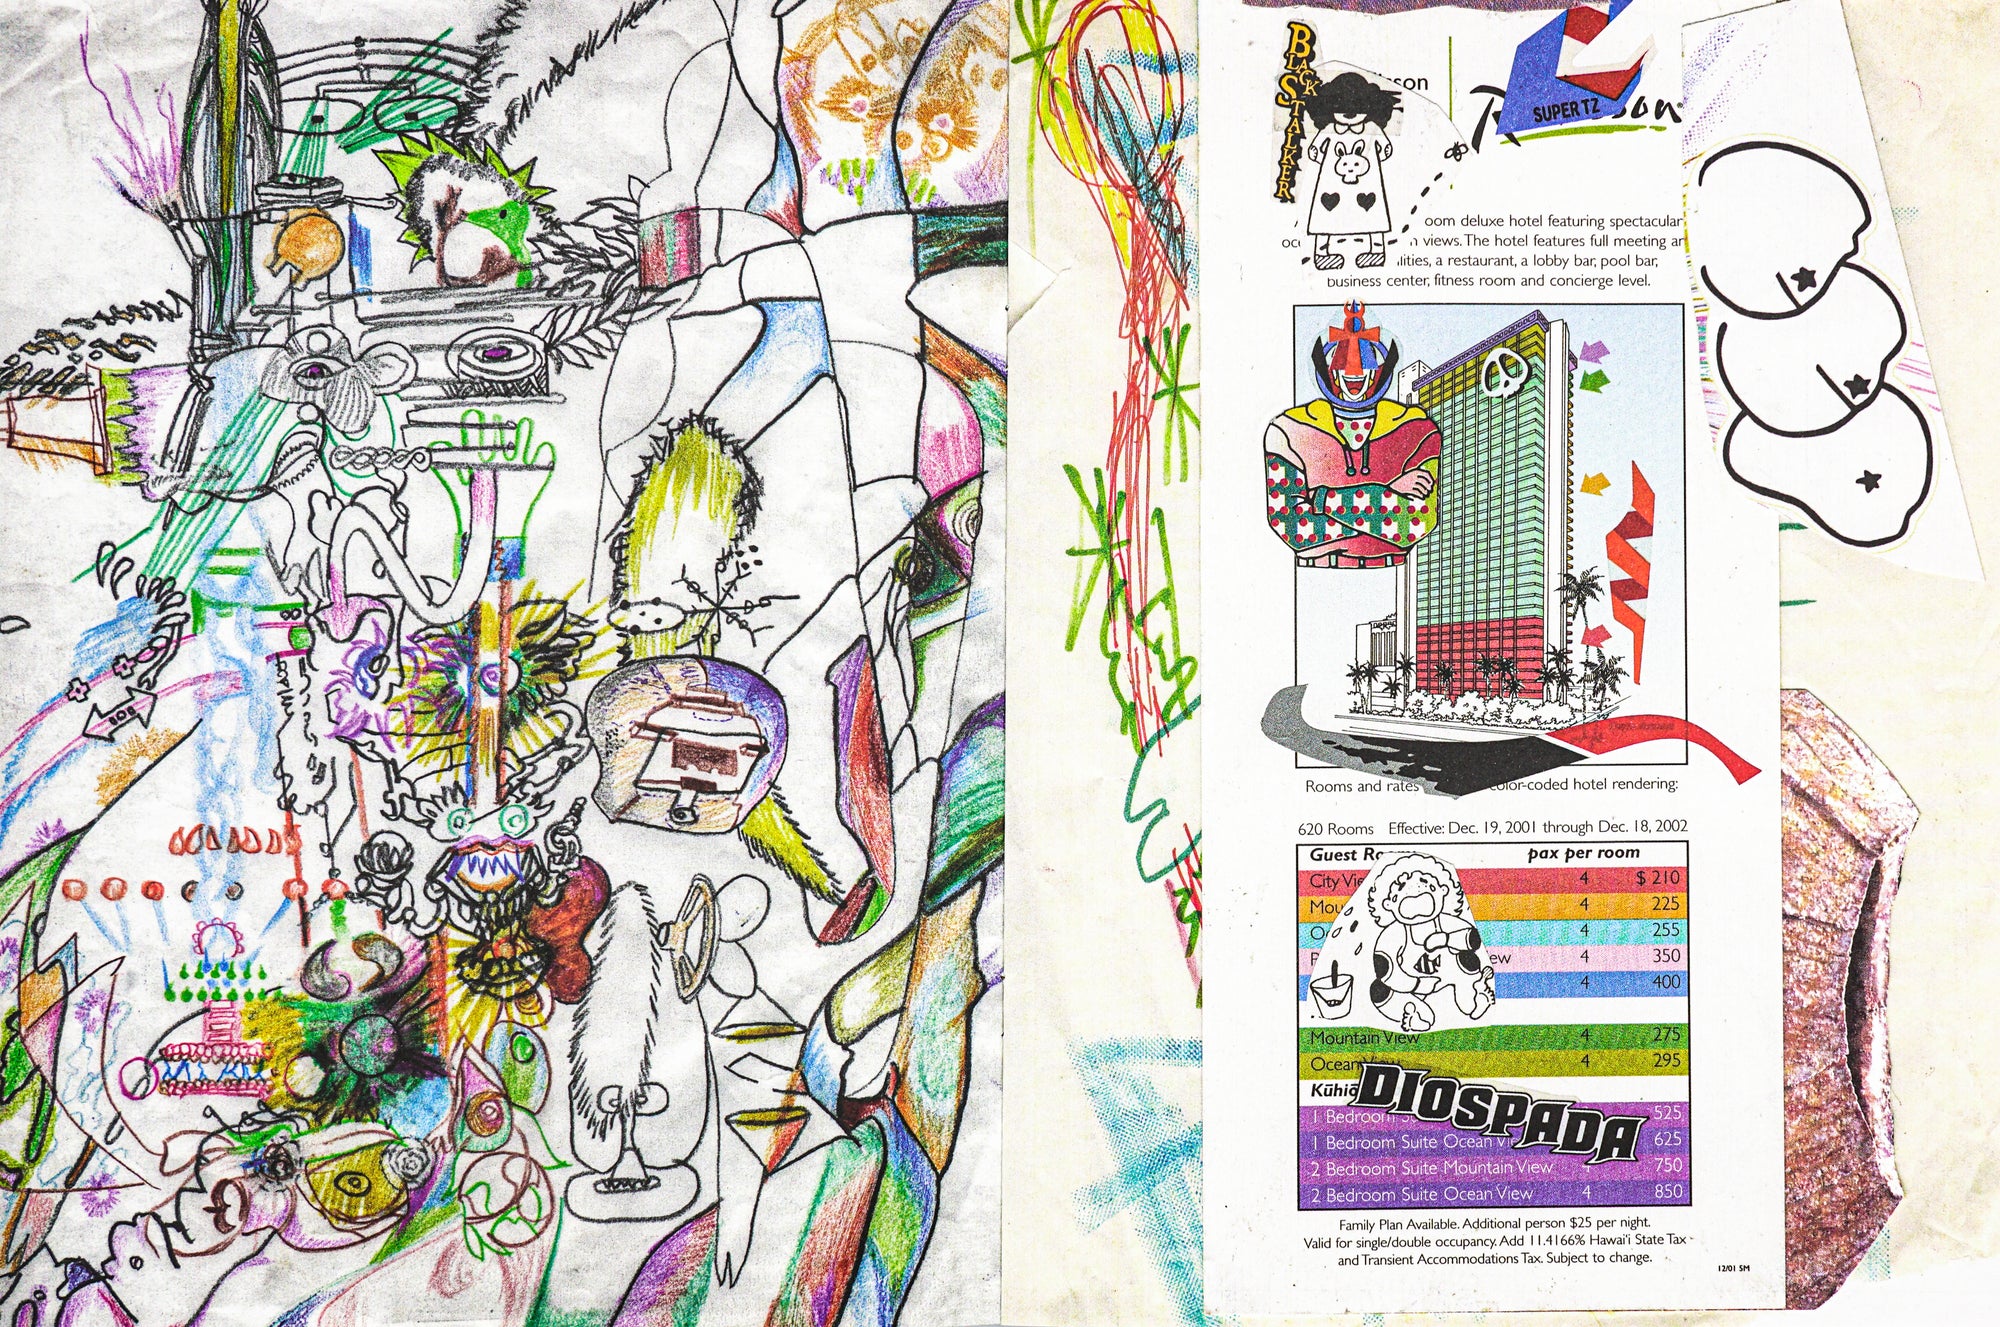 Spread with various scribbles, drawings, mixed media cut-outs in a vivid colour palette.